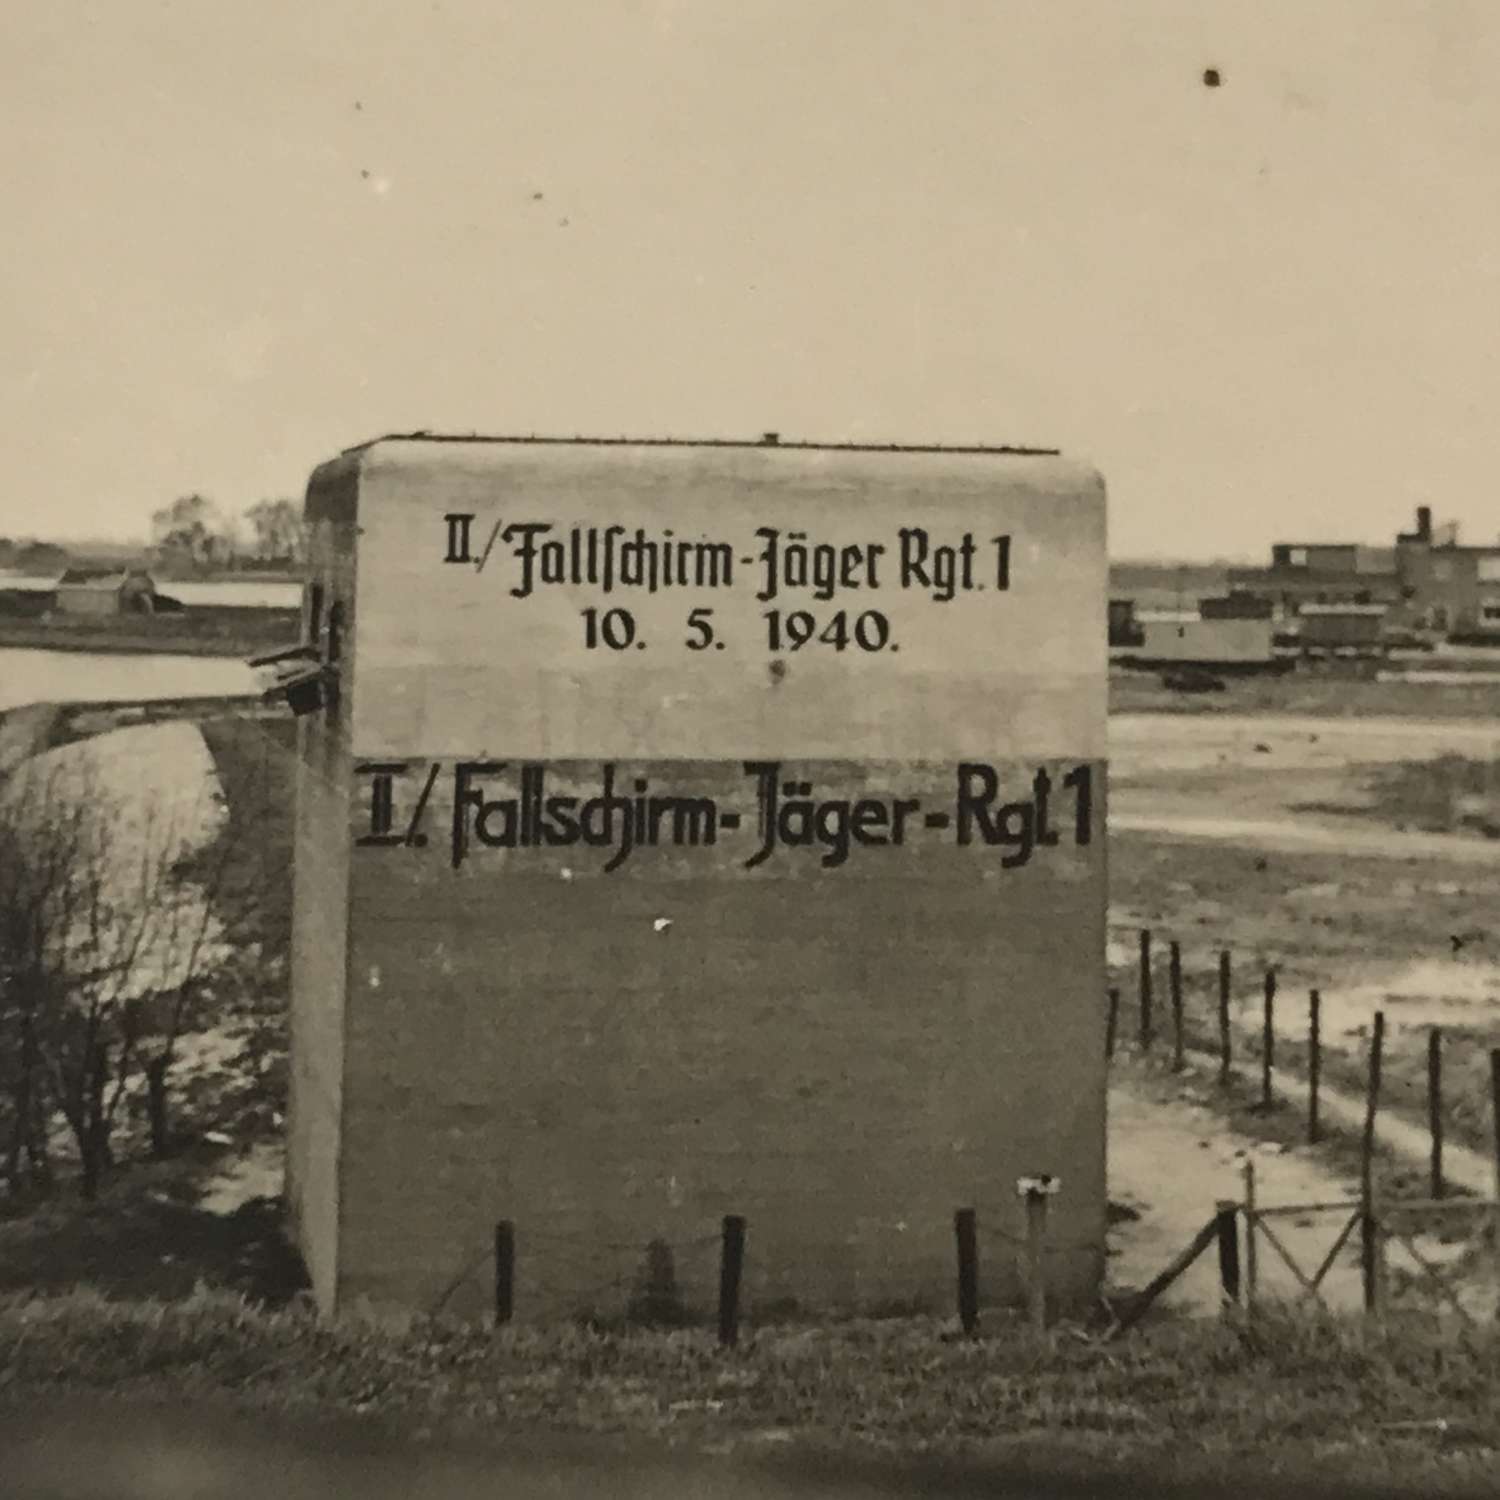 Photo of pillbox captured and graffitied by Fallschirmjager Regt 1